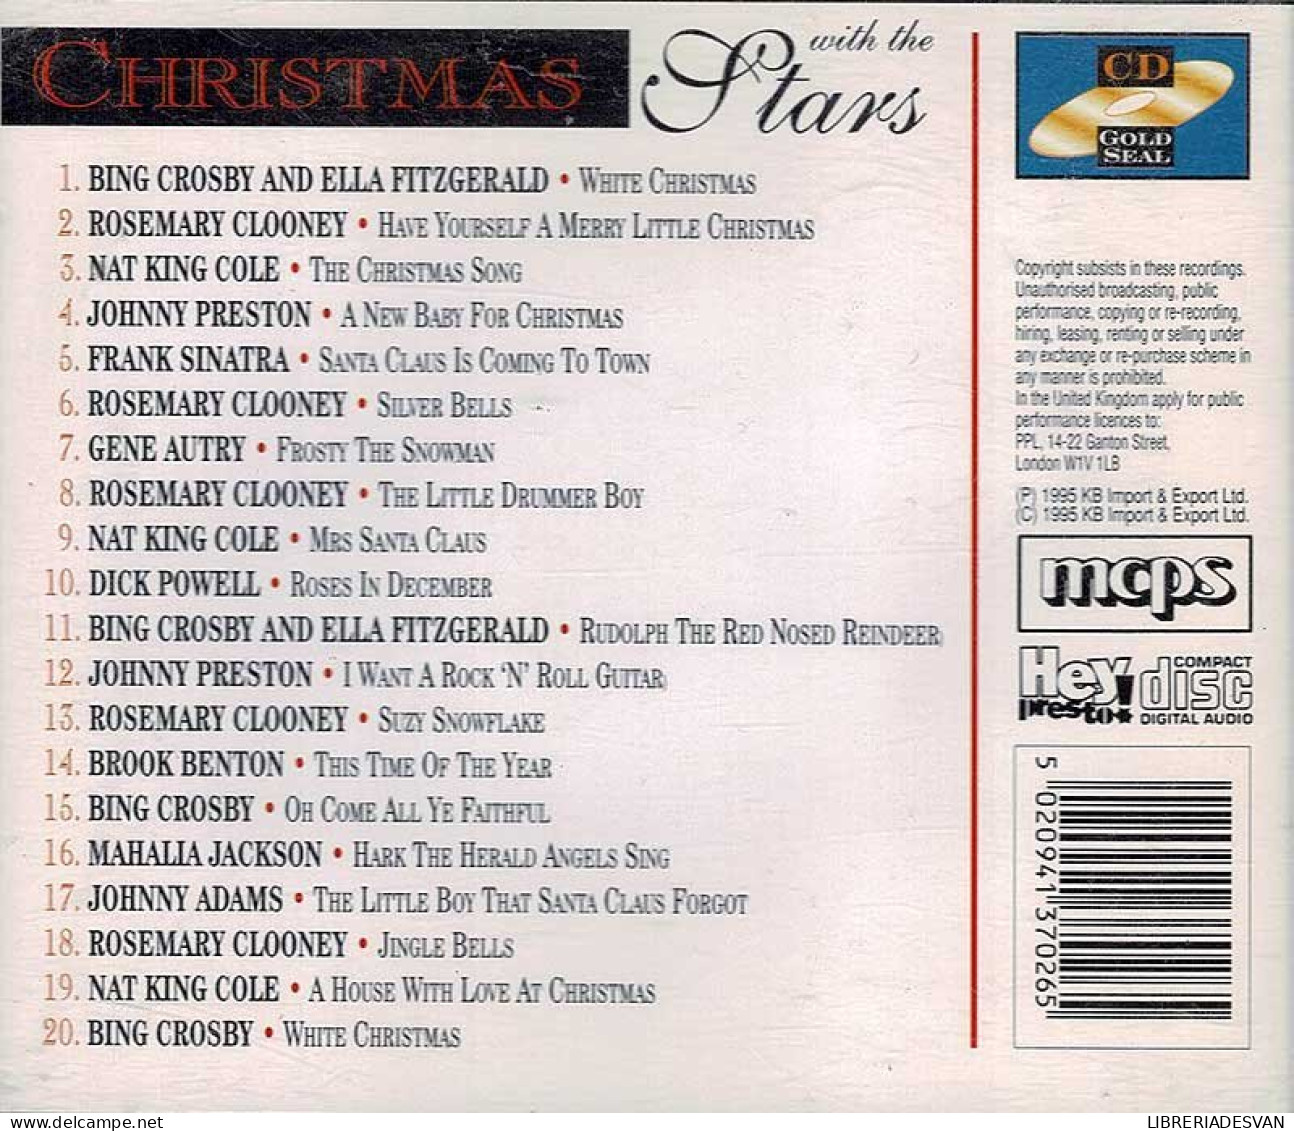 Christmas With The Stars. CD - Country & Folk